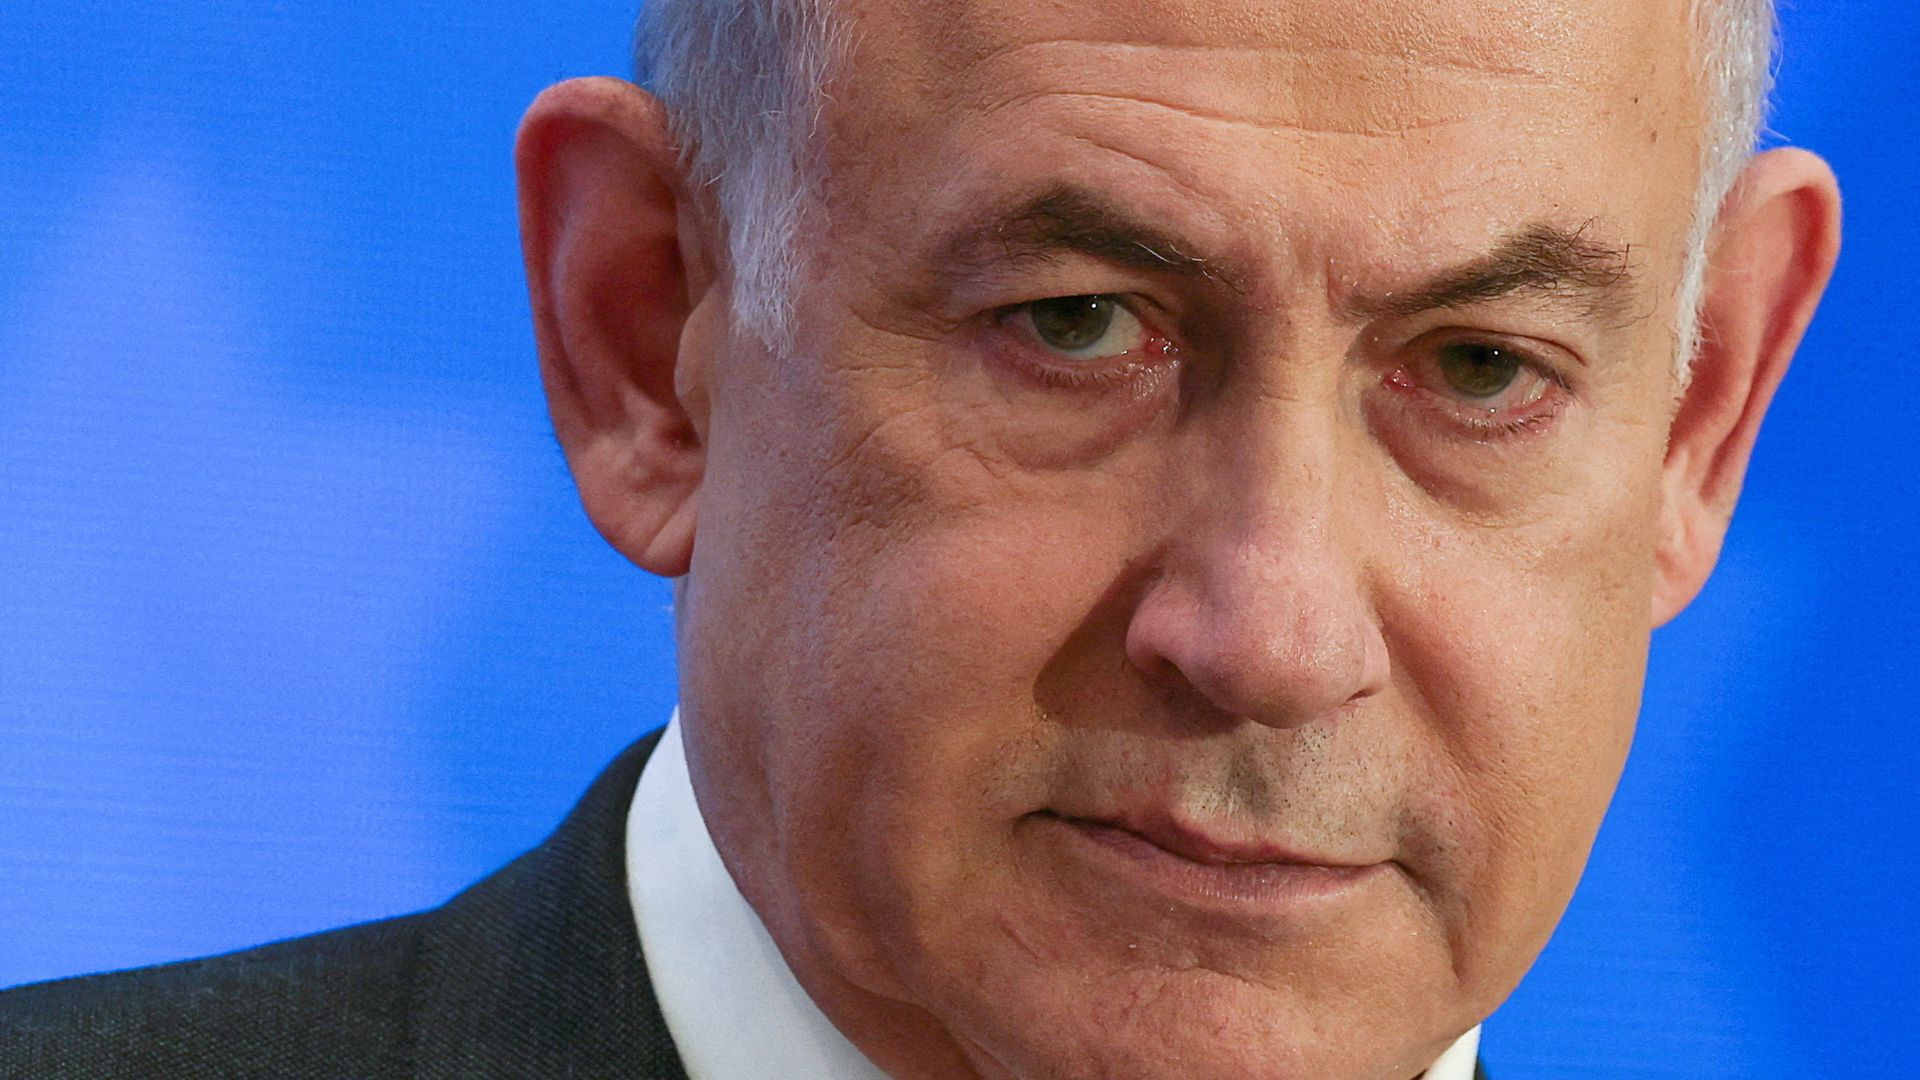 Netanyahu rejects ceasefire demands and shuts major TV network's operations in Israel